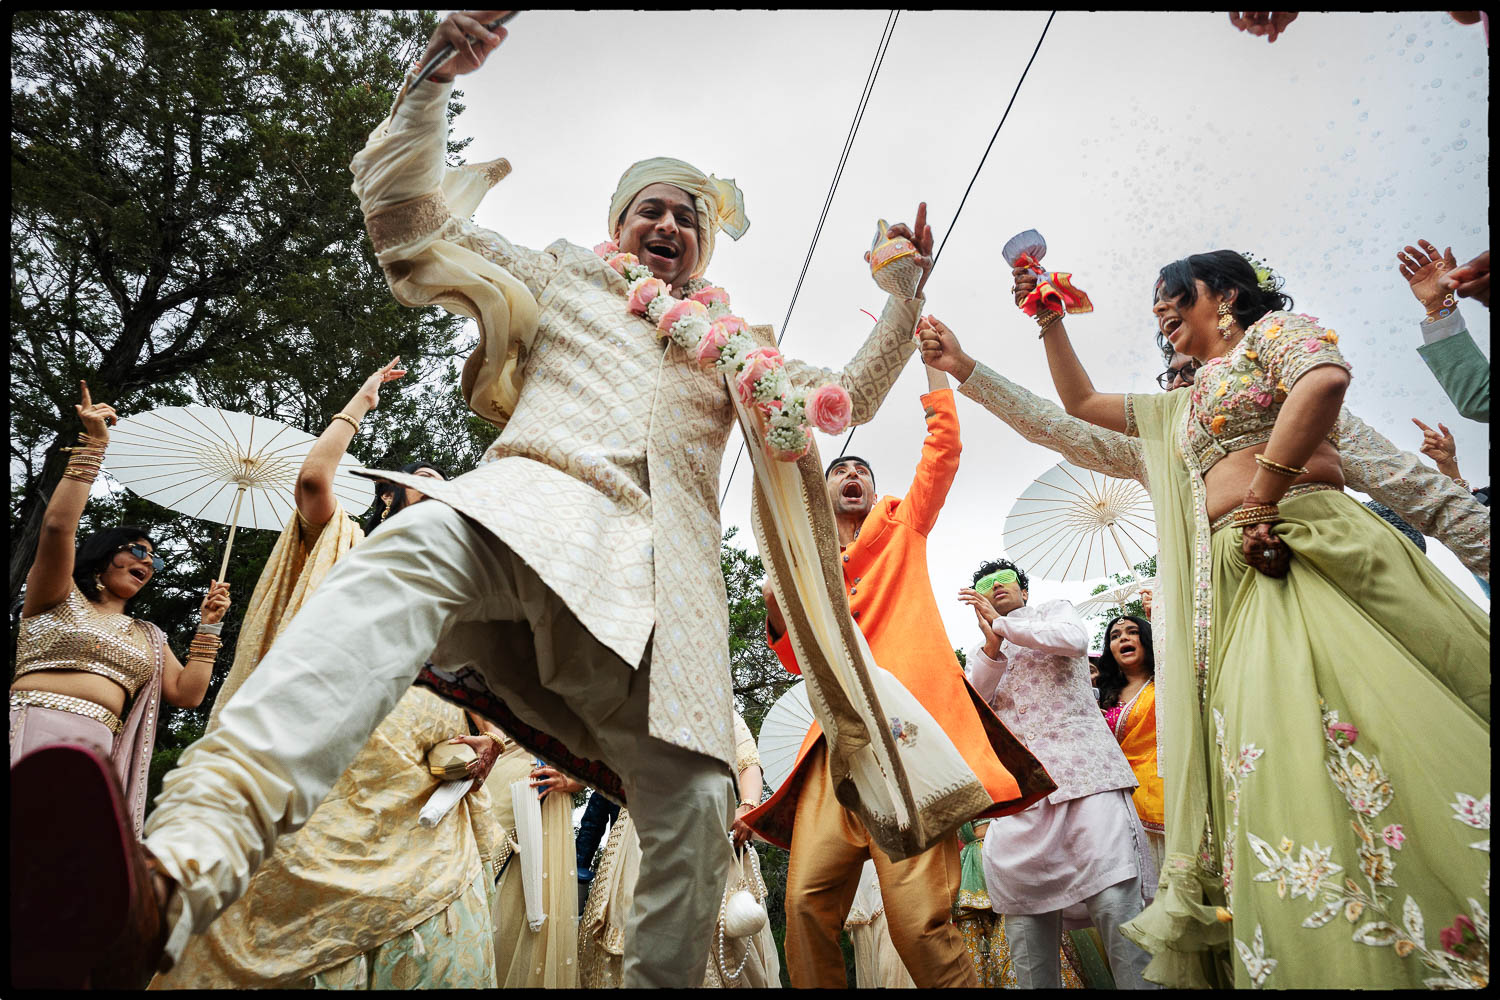 050 The Videre Estate South Asian Wedding in Wimberley Texas Philip Thomas wedding photographer L1080219 Edit 2